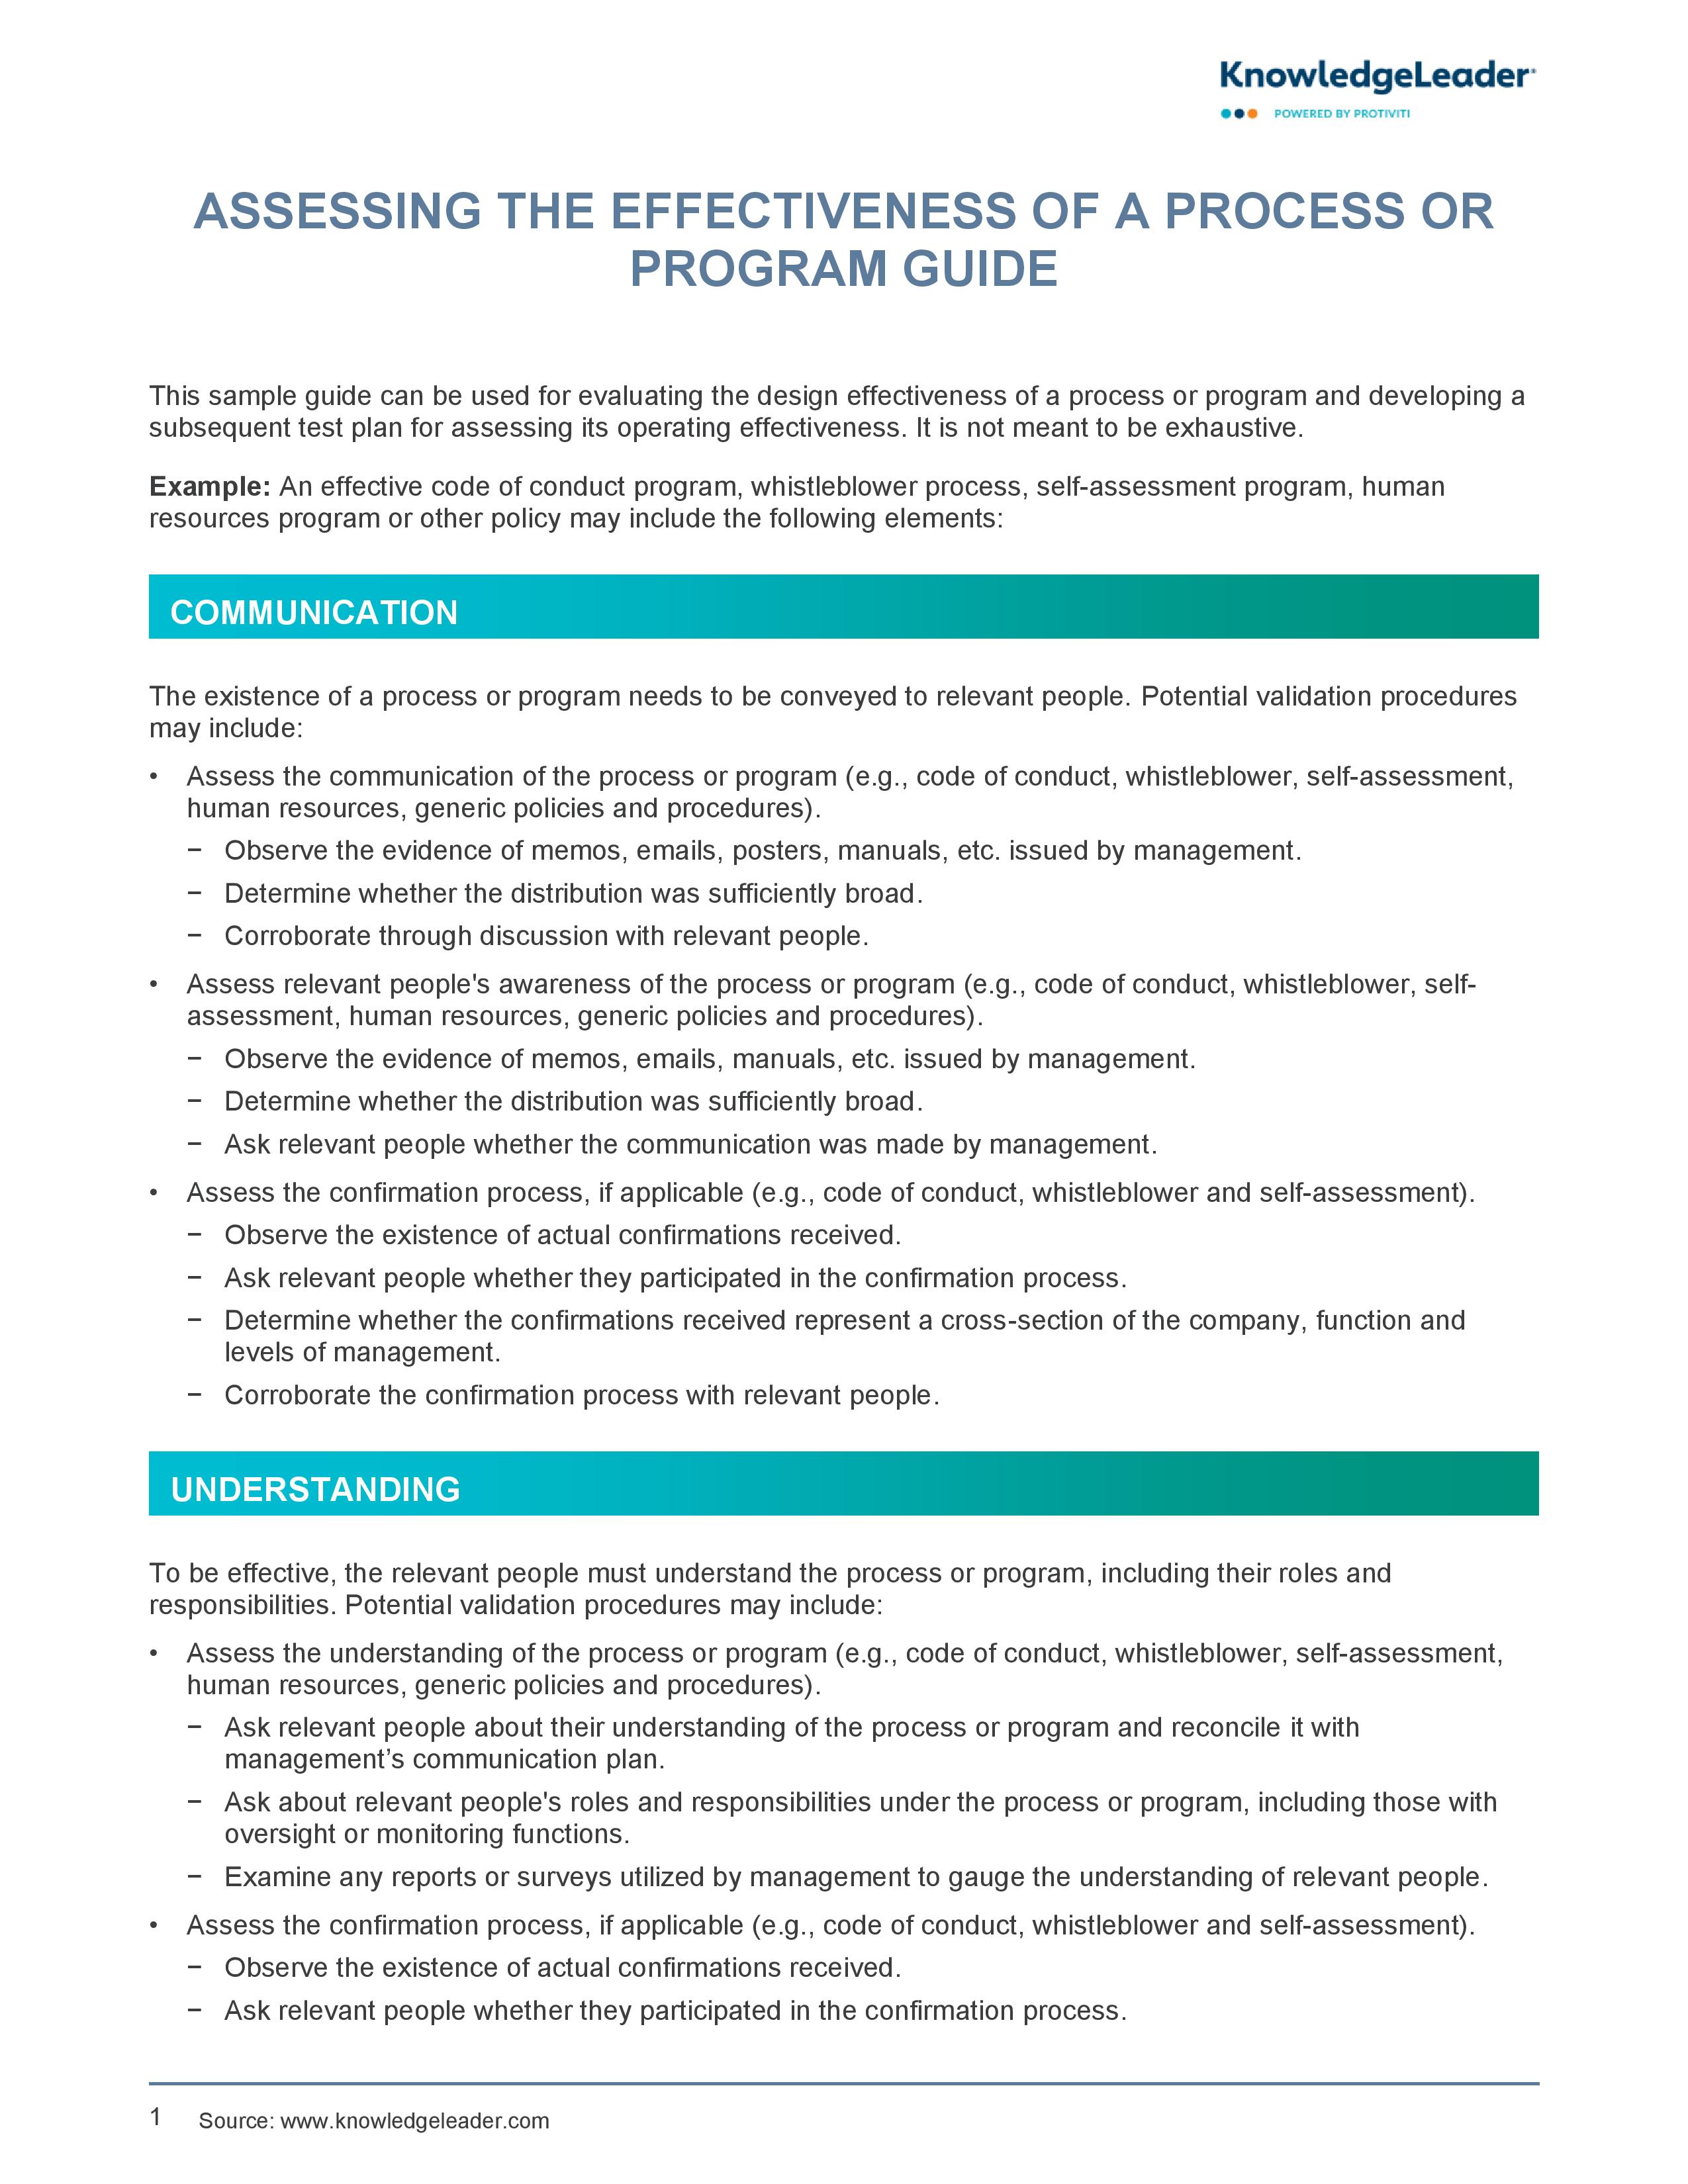 Screenshot of the first page of Assessing the Effectiveness of a Process or Program Guide